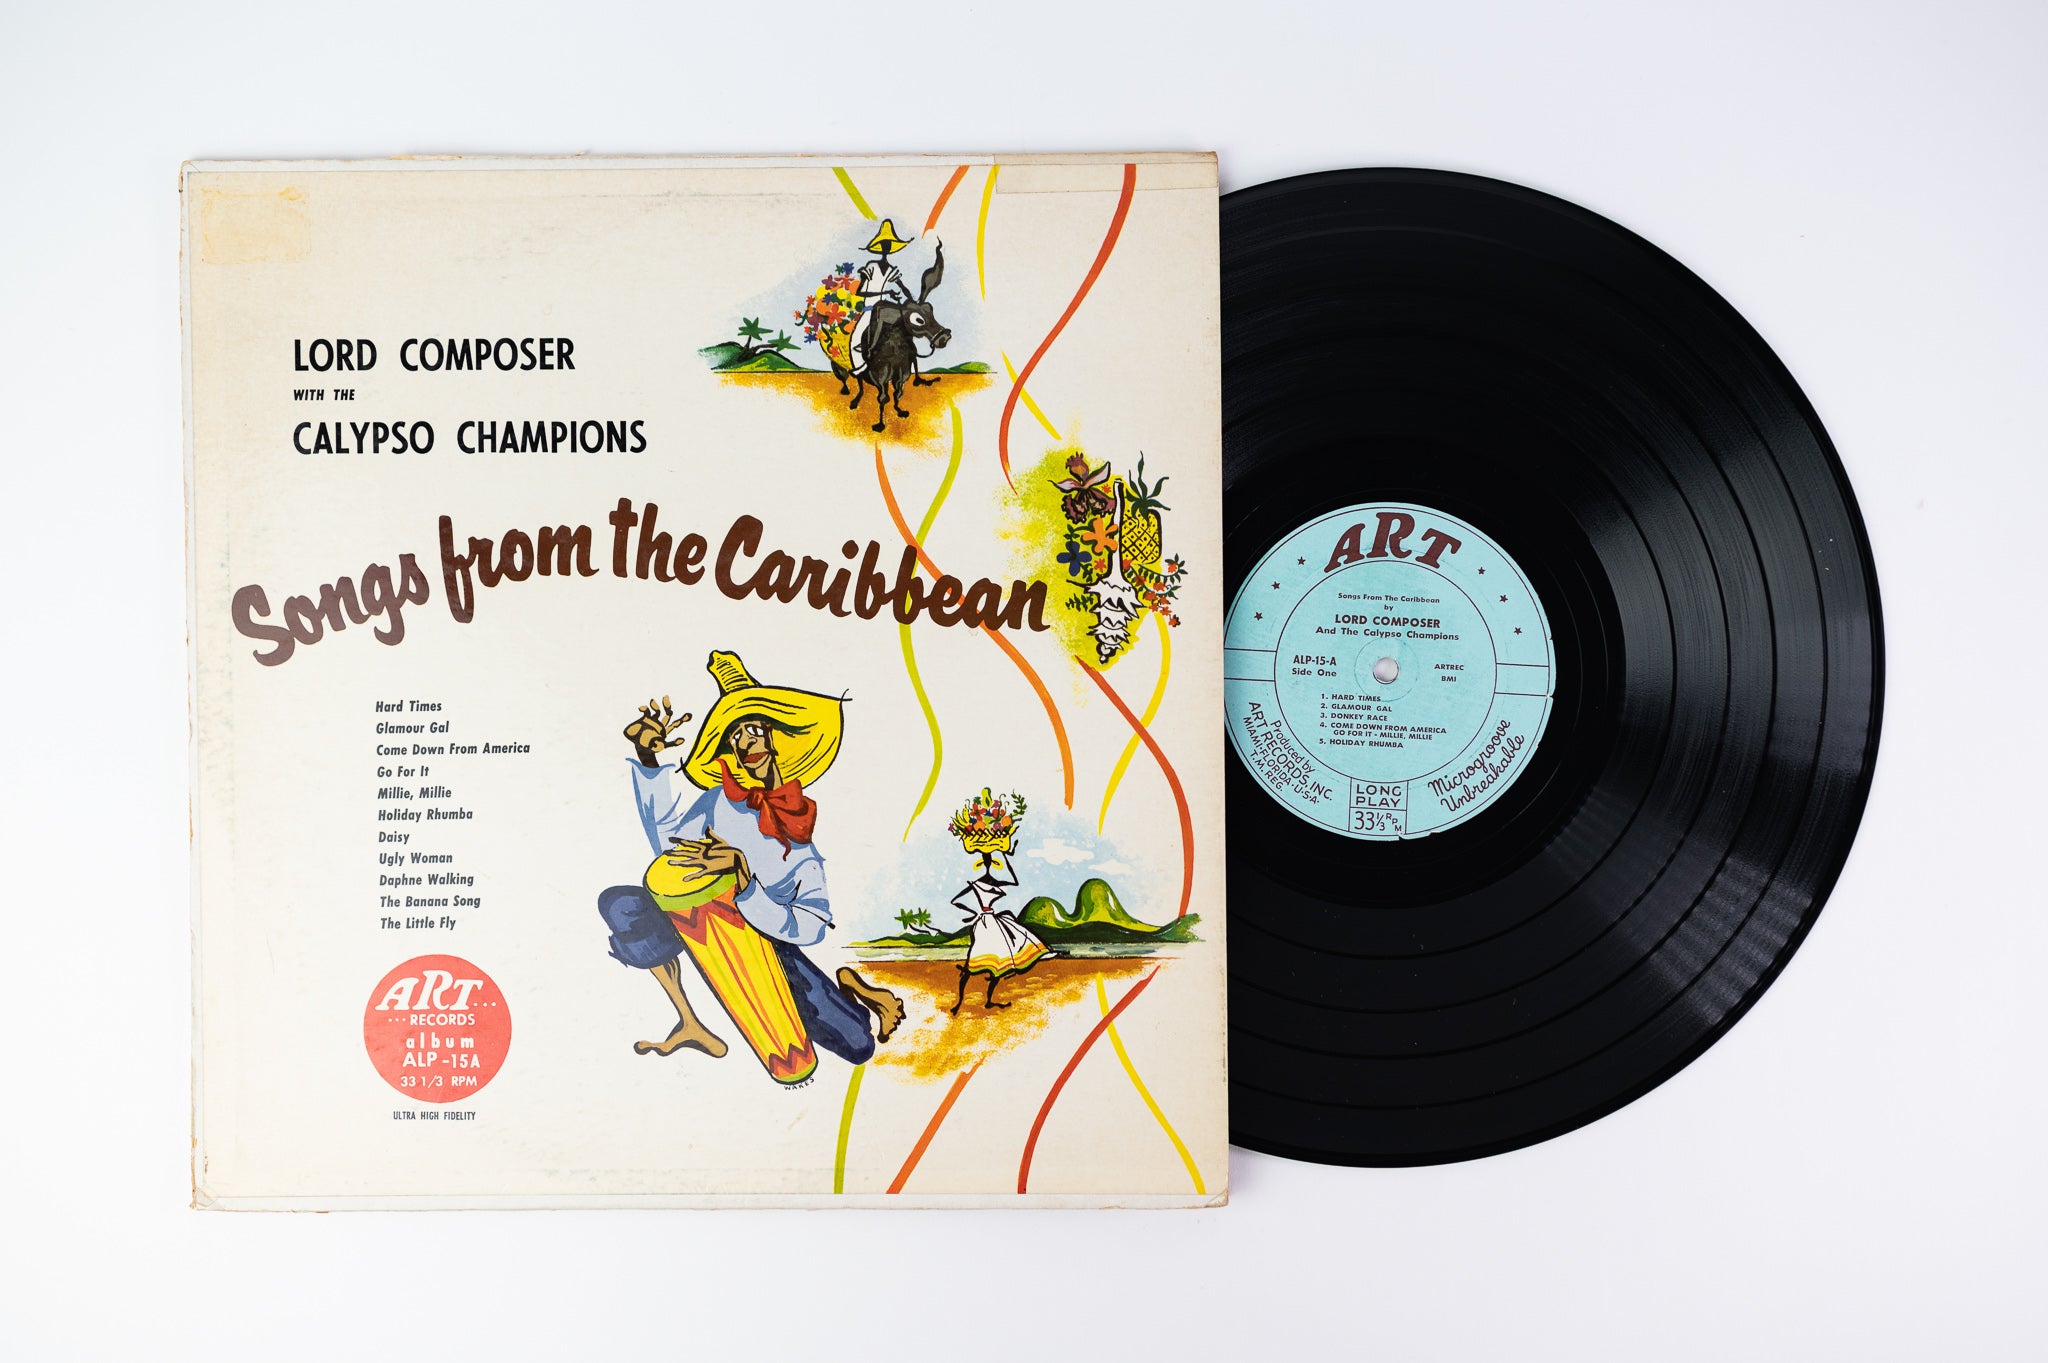 Lord Composer With The Calypso Champions - Songs From The Caribbean on Art Records